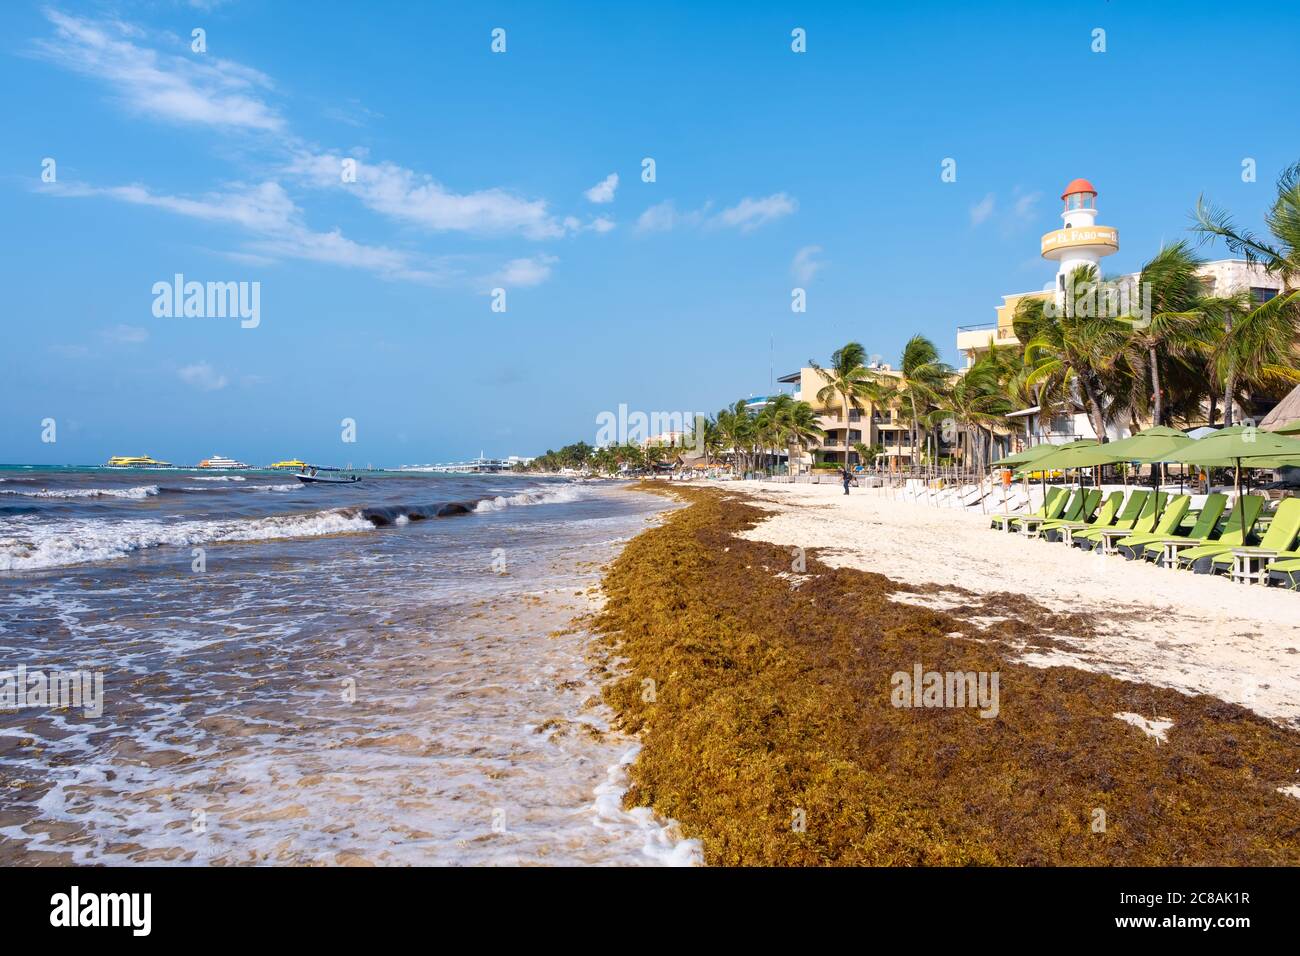 Playa Del Carmen Mexico High Resolution Stock Photography and Images - Alamy